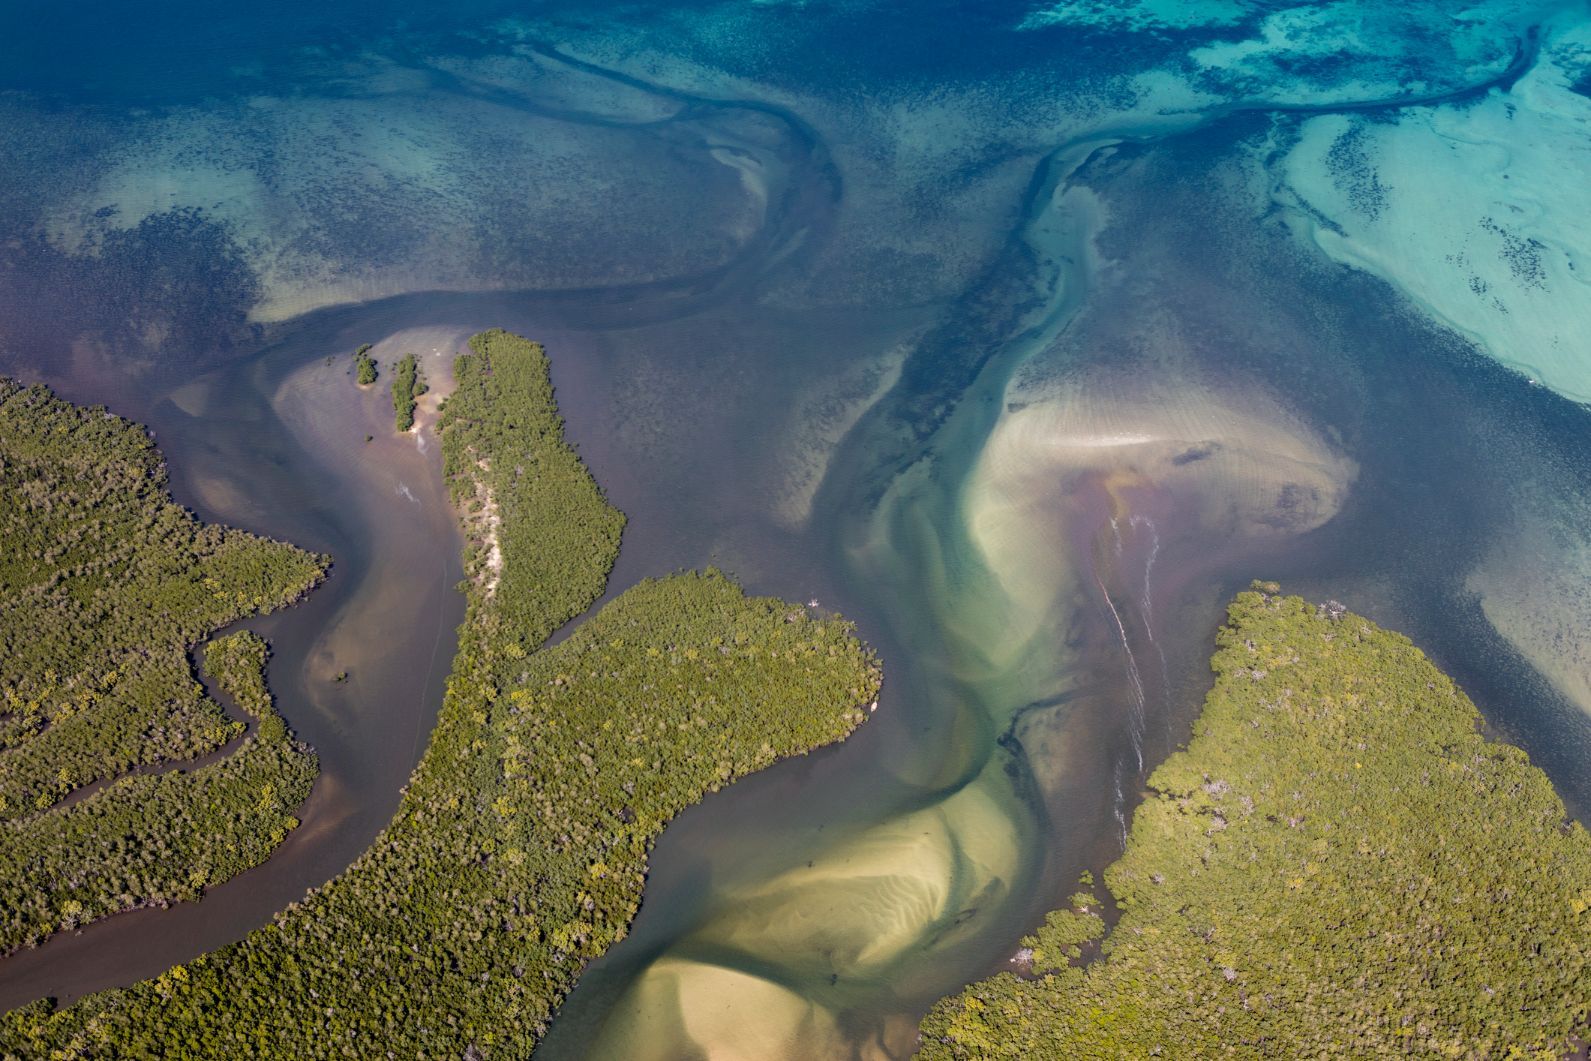 A coastal mangrove forest on an Ibo Island in the Quirimbas Archipelago, Mozambique. Photo: Getty